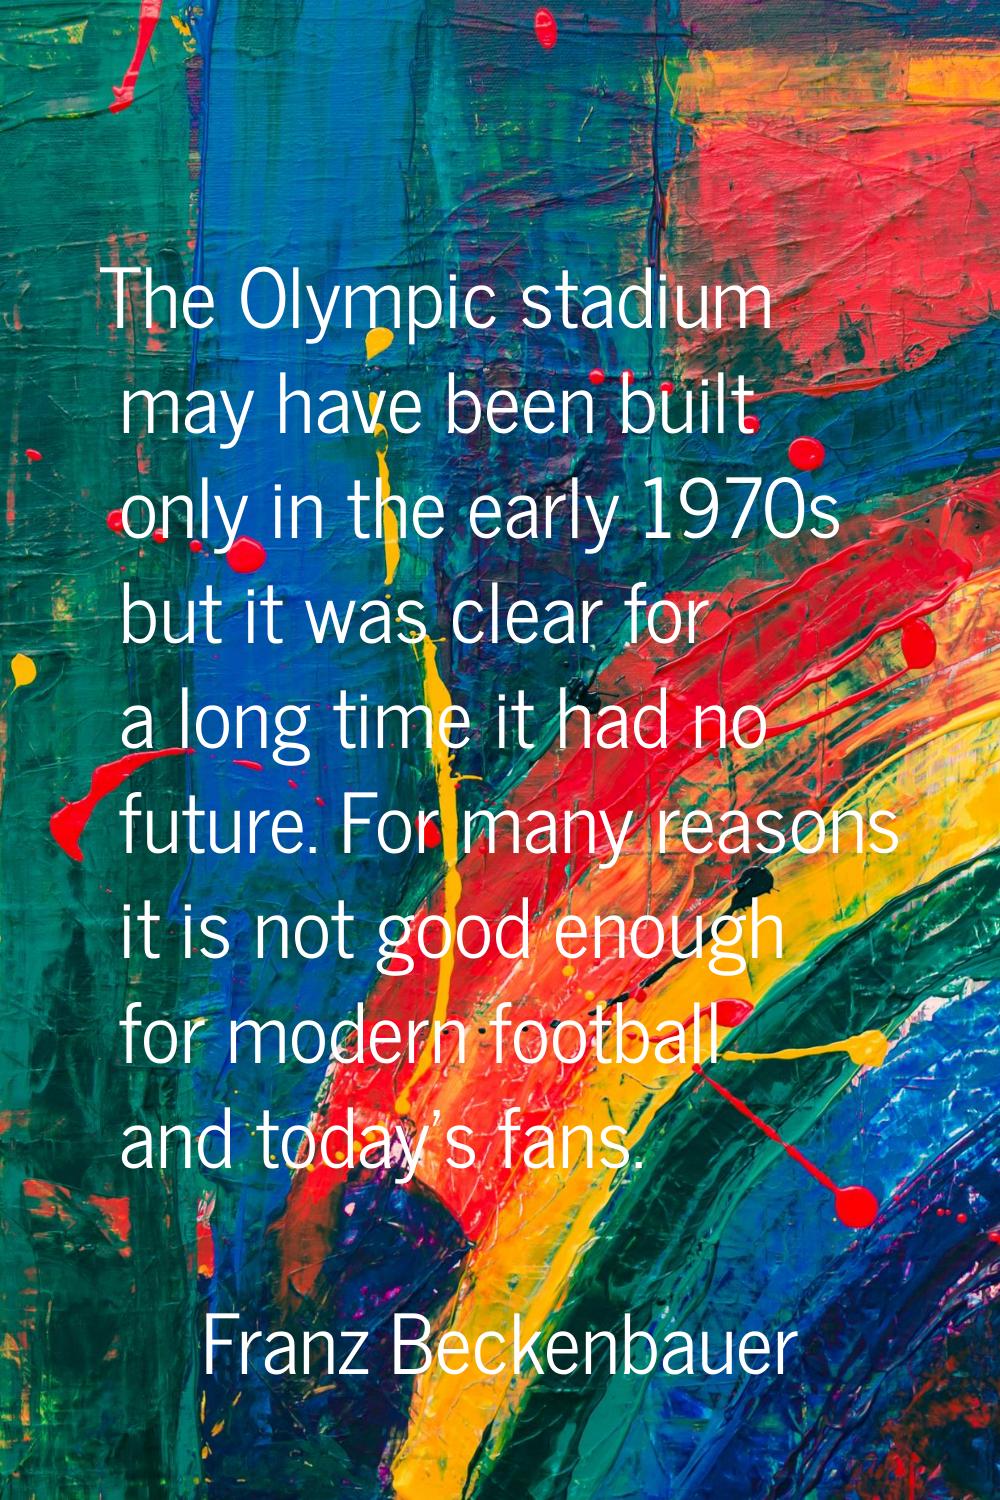 The Olympic stadium may have been built only in the early 1970s but it was clear for a long time it